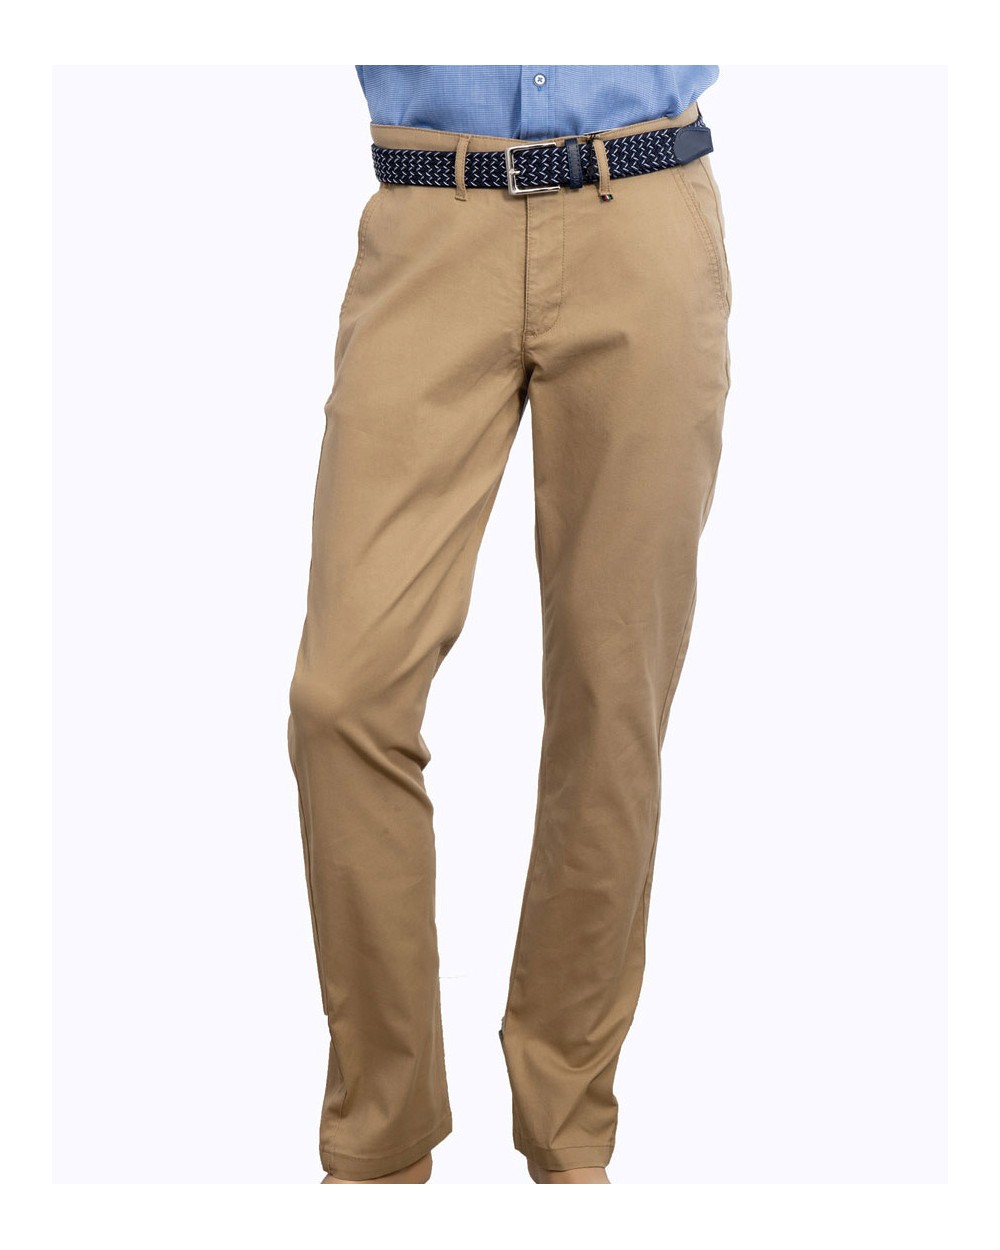 copy of Men's Cotton Chinos Pant with Belt, 2754-3